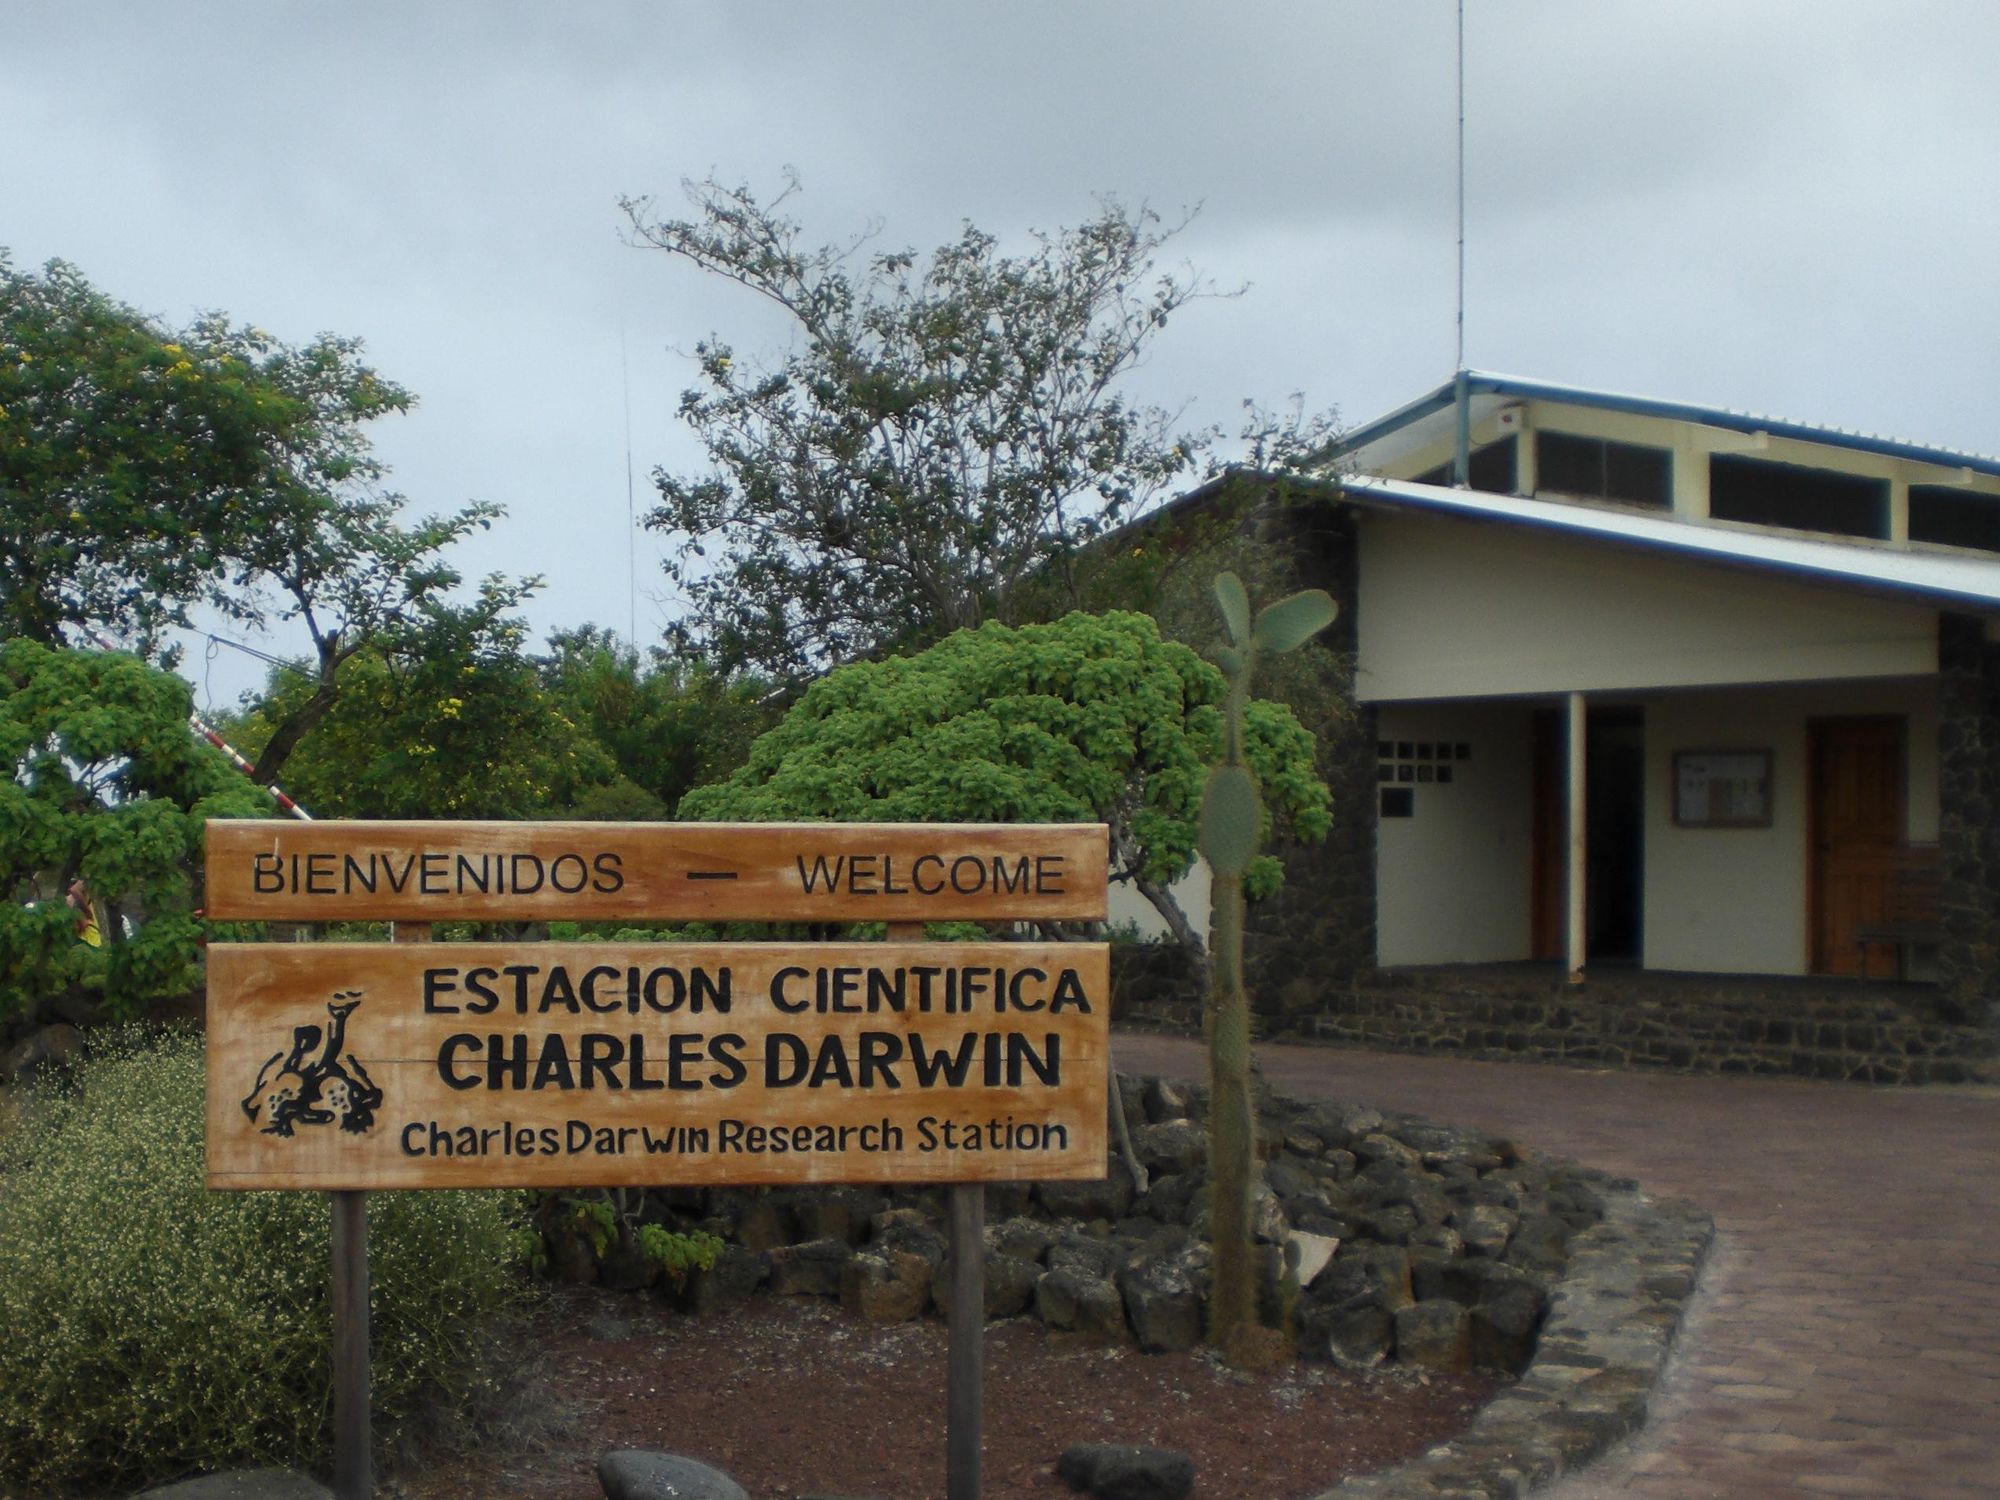 The entrance to the Charles Darwin Research Station. Photo: Wiki Commons